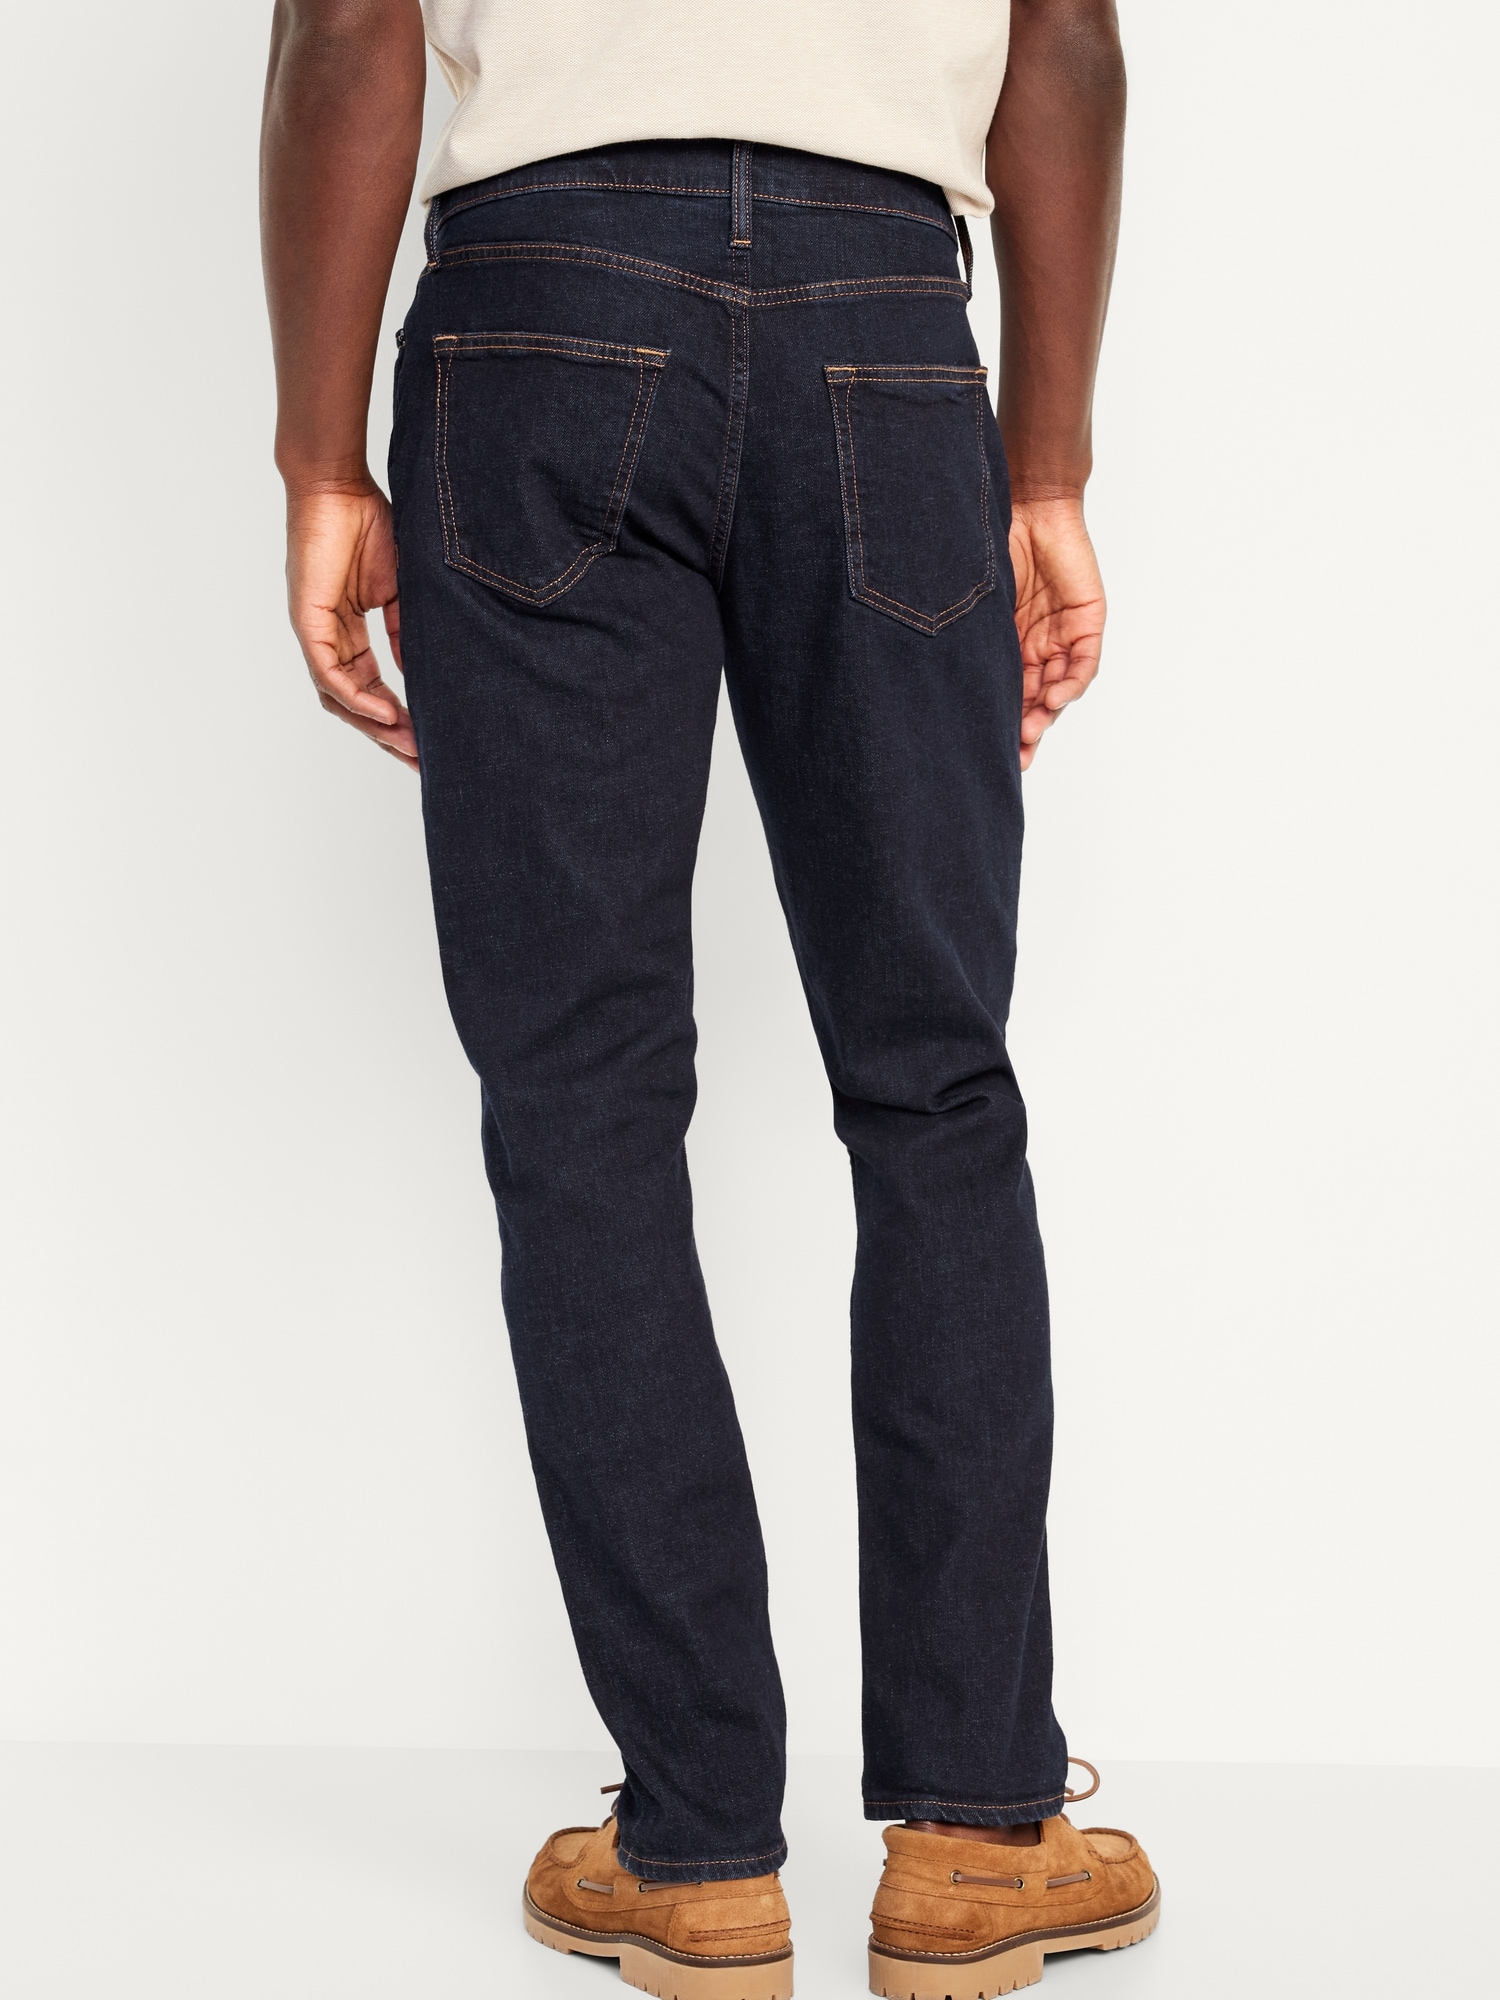 Denim De Luxe - Shop Stretchable Jeans for Men at Mufti